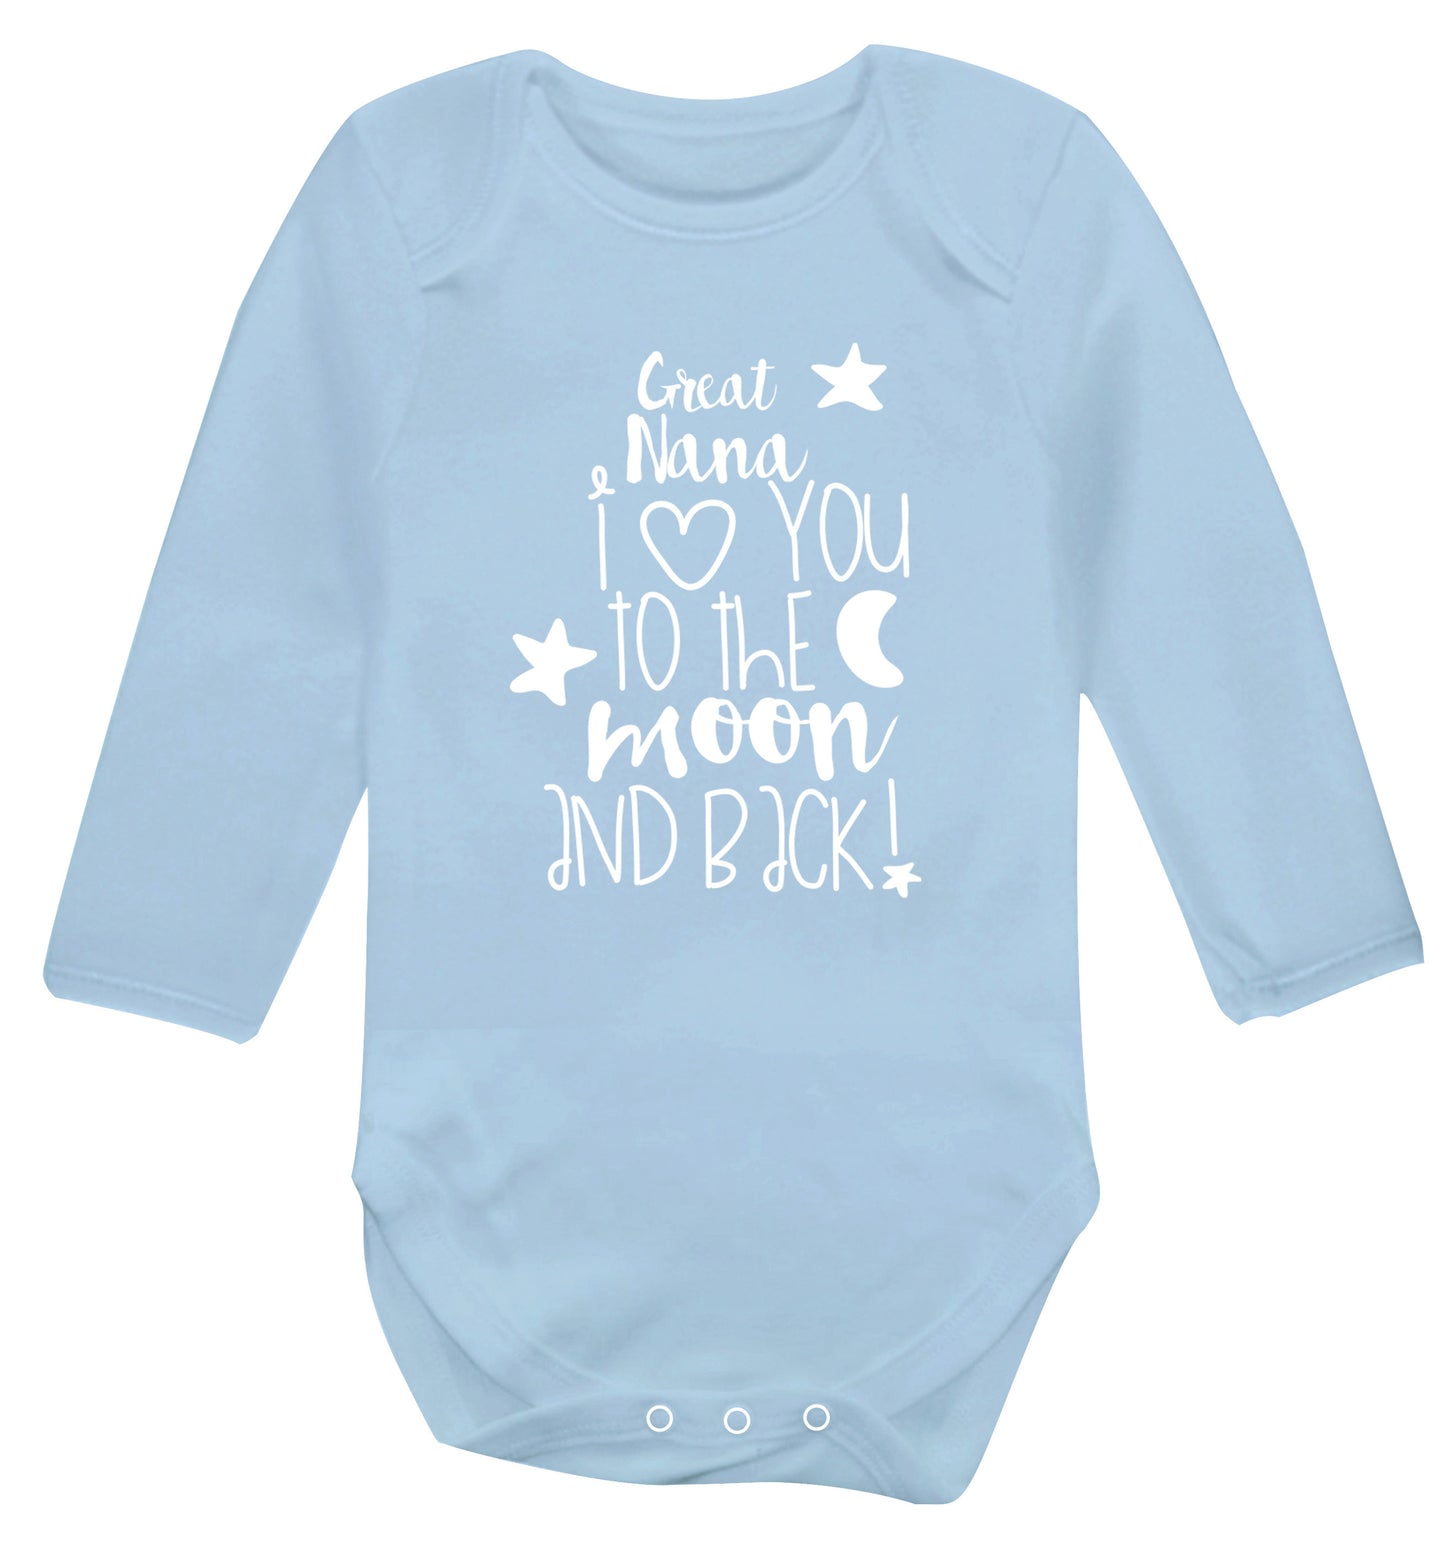 Great Nana I love you to the moon and back Baby Vest long sleeved pale blue 6-12 months